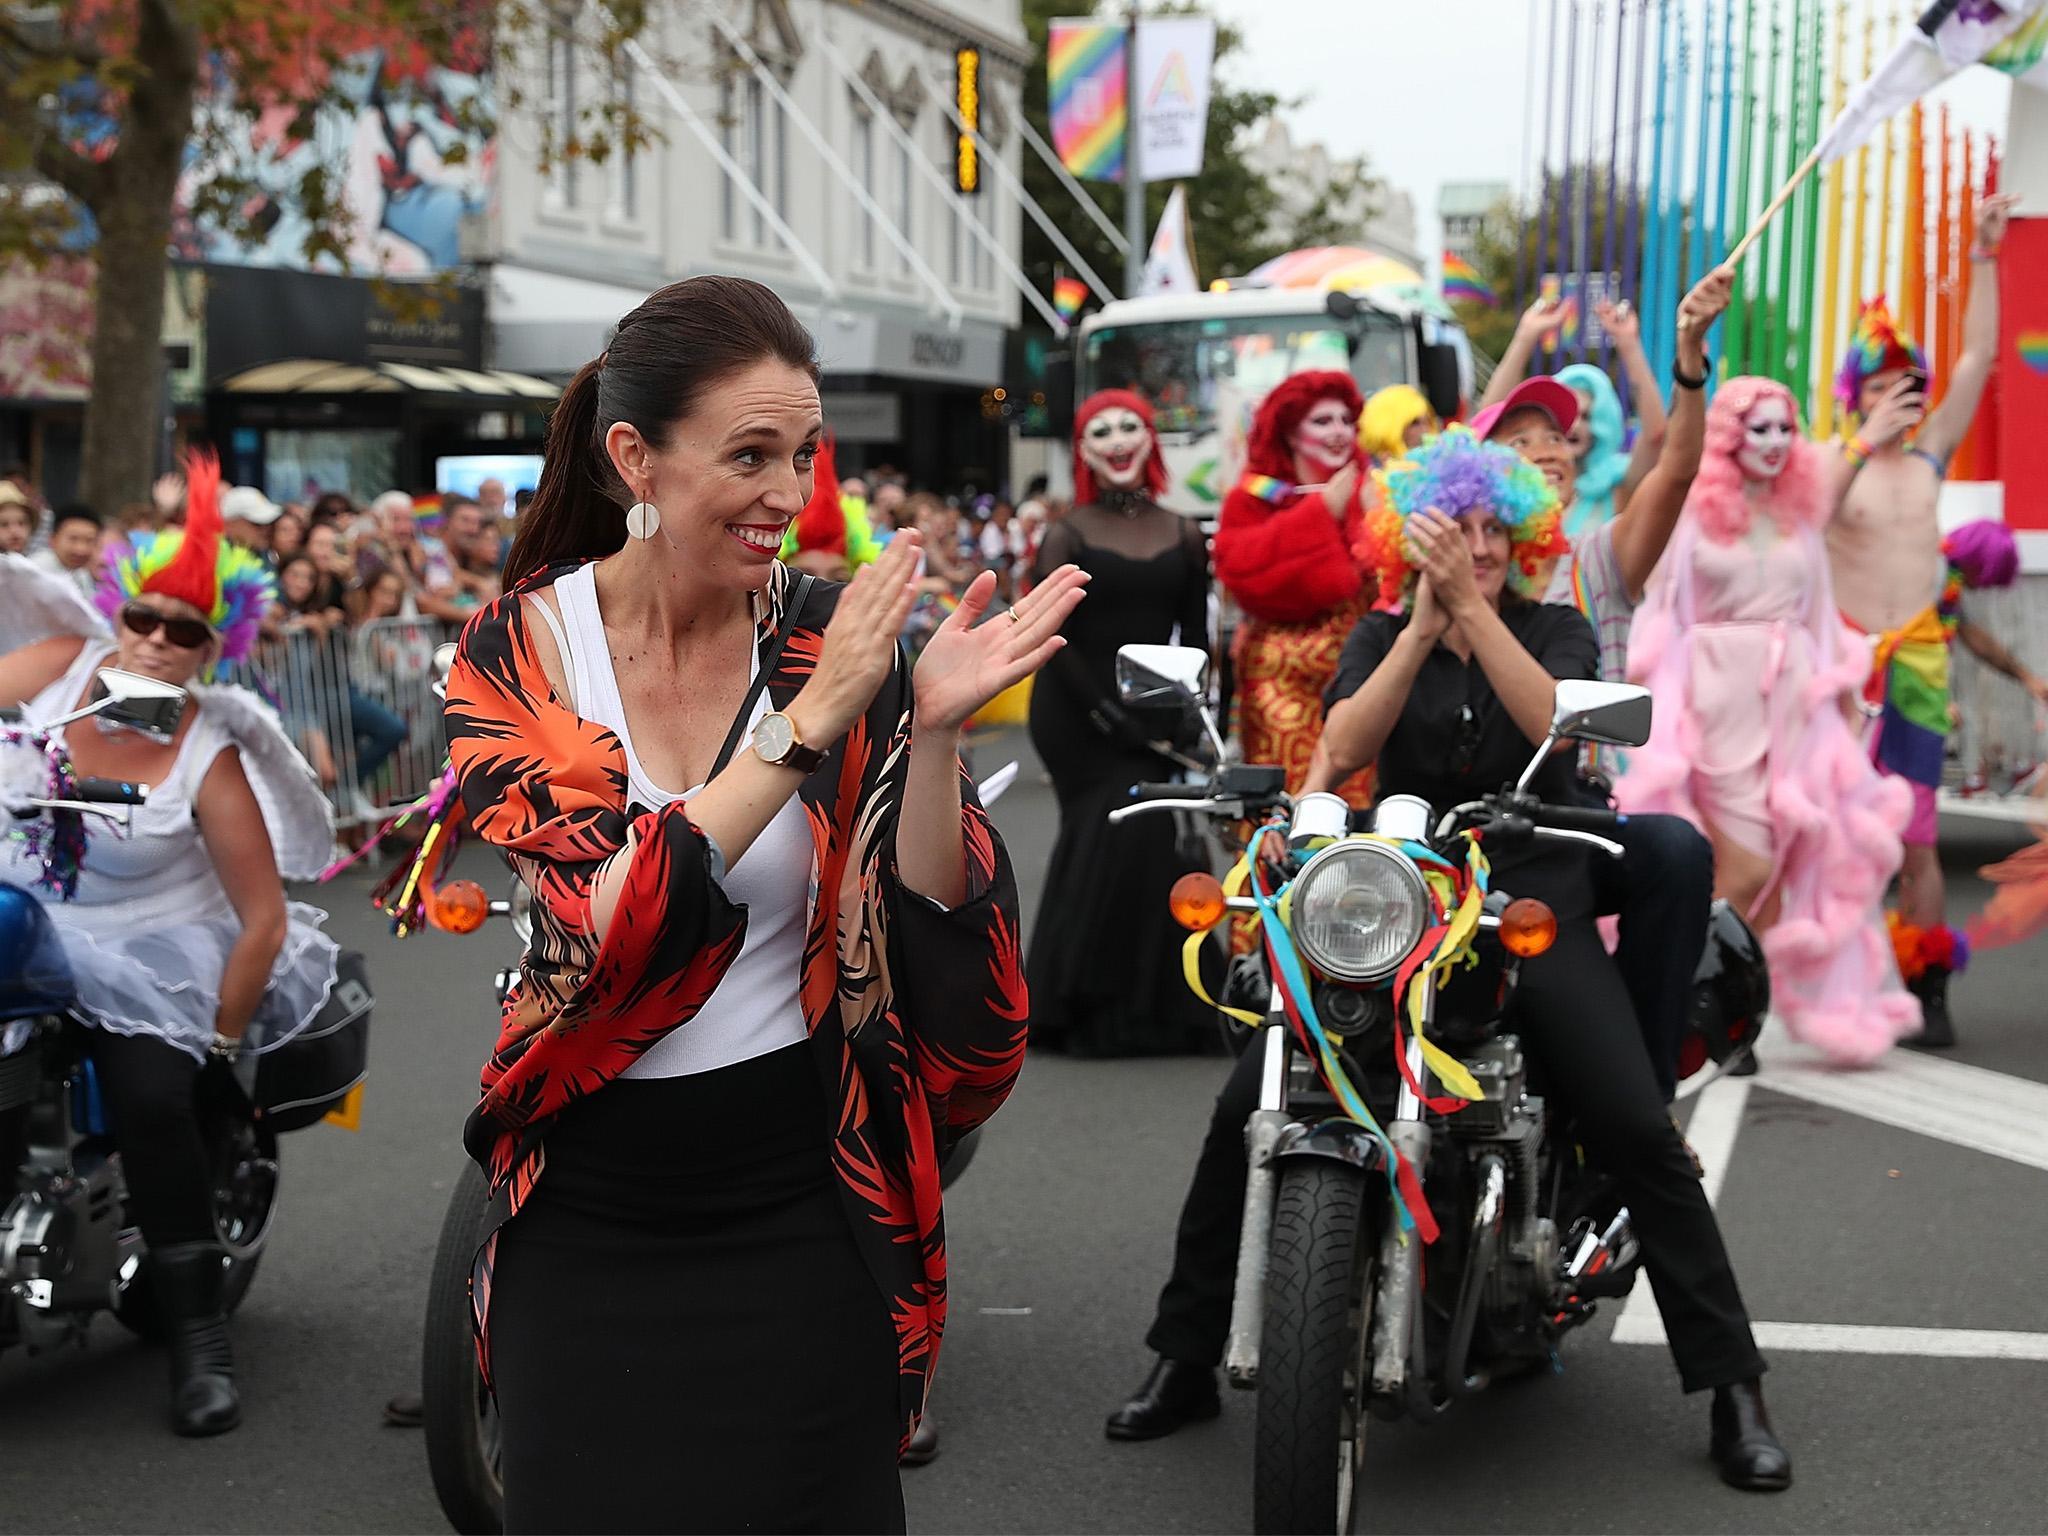 New Zealand Prime Minister Becomes First Ever To March In Gay Pride Parade The Independent